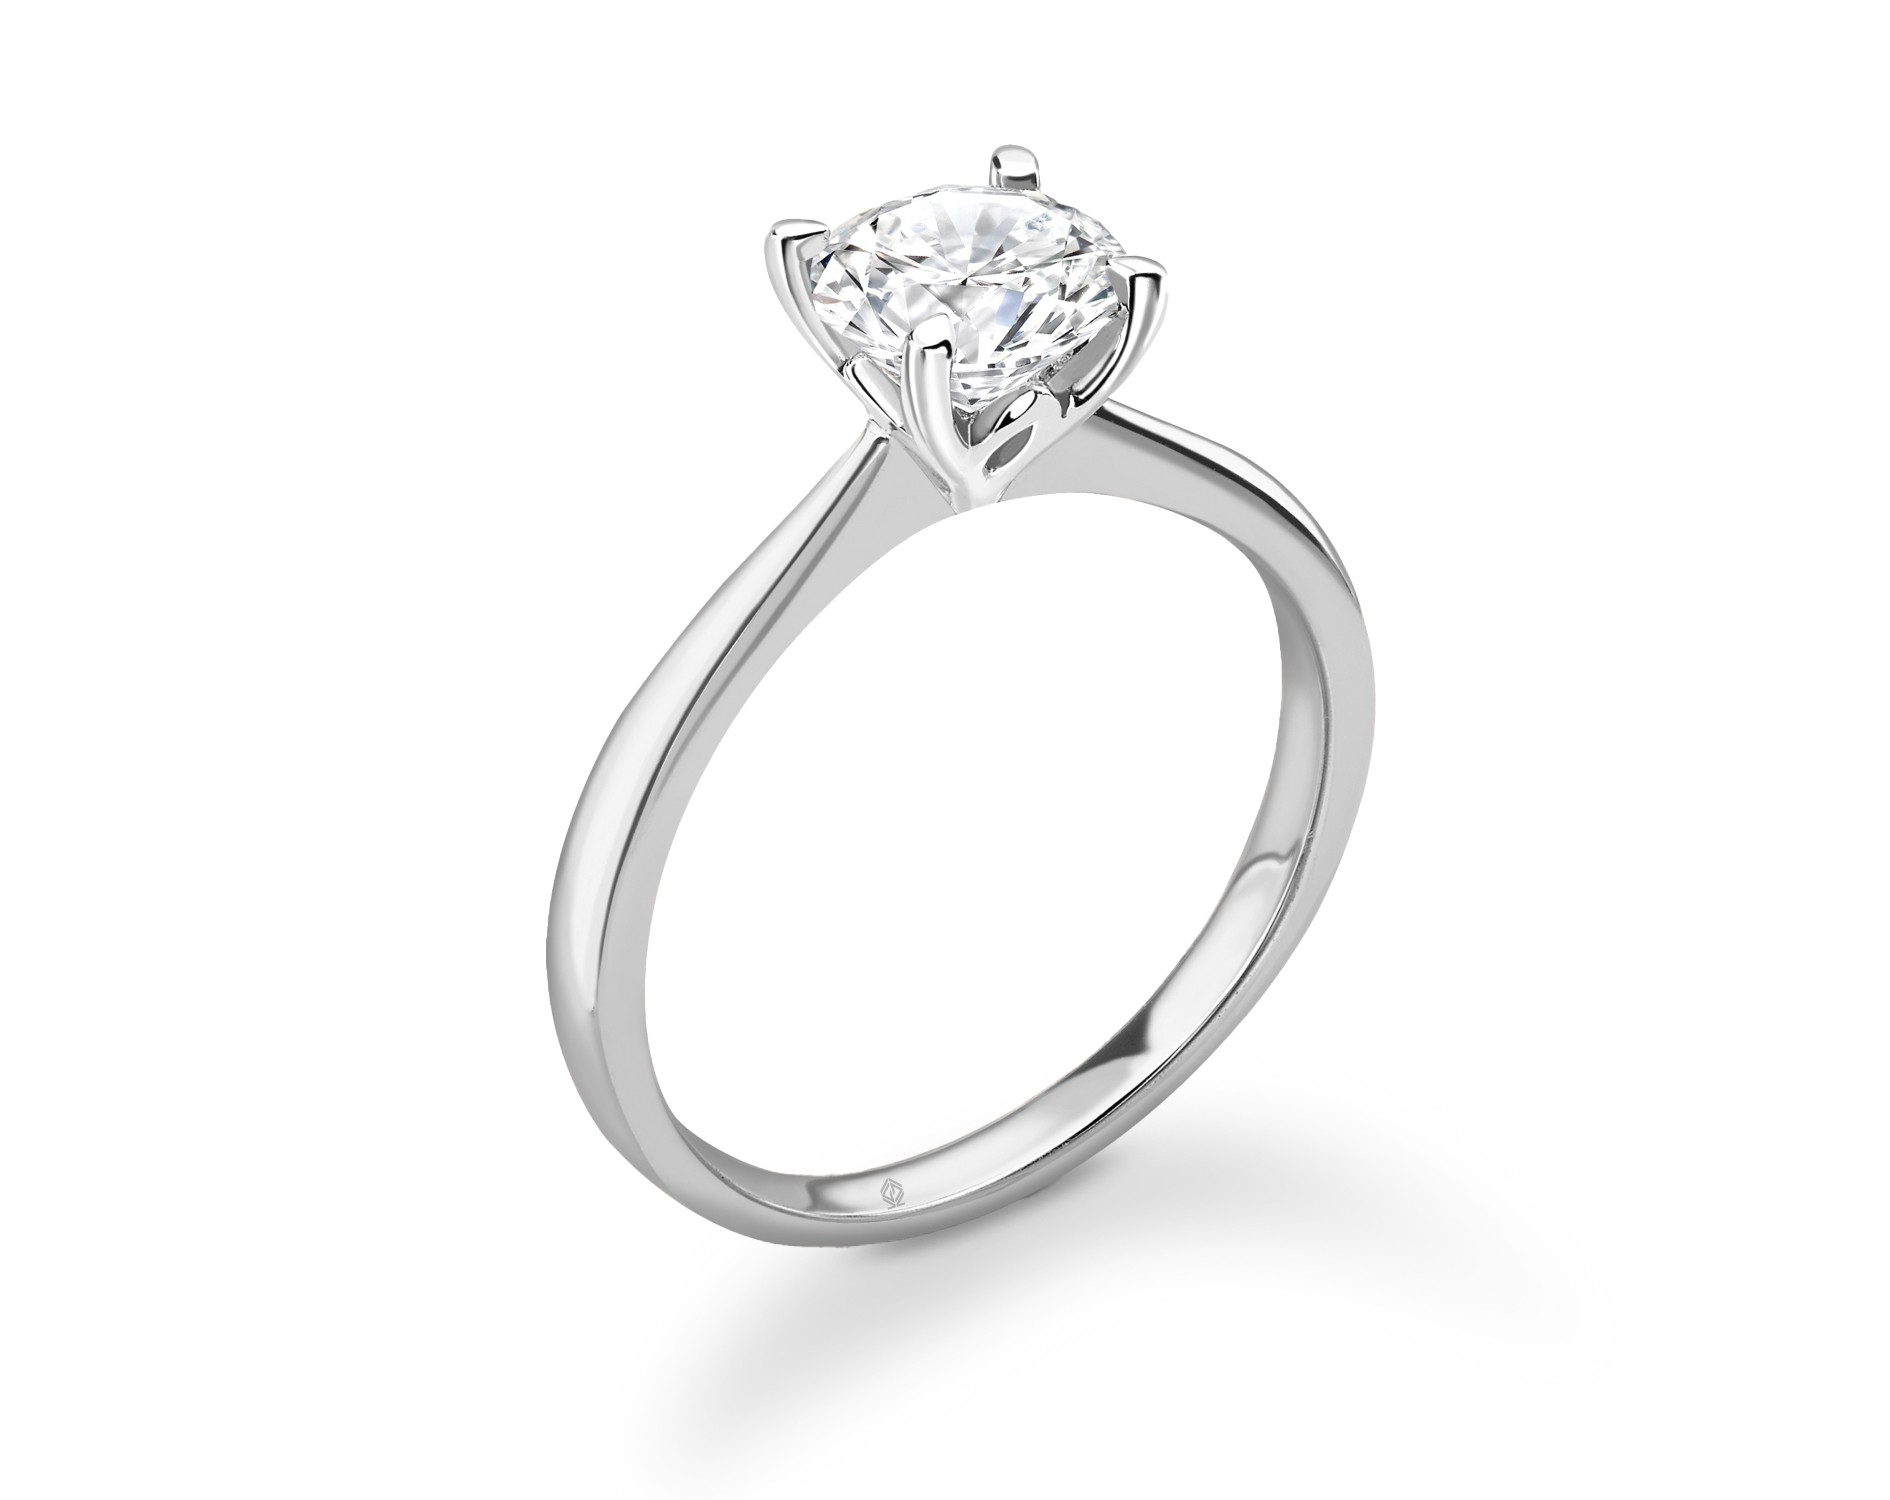 18K WHITE GOLD 4 PRONGS HEAD SOLITAIRE ROUND CUT DIAMOND ENGAGEMENT RING